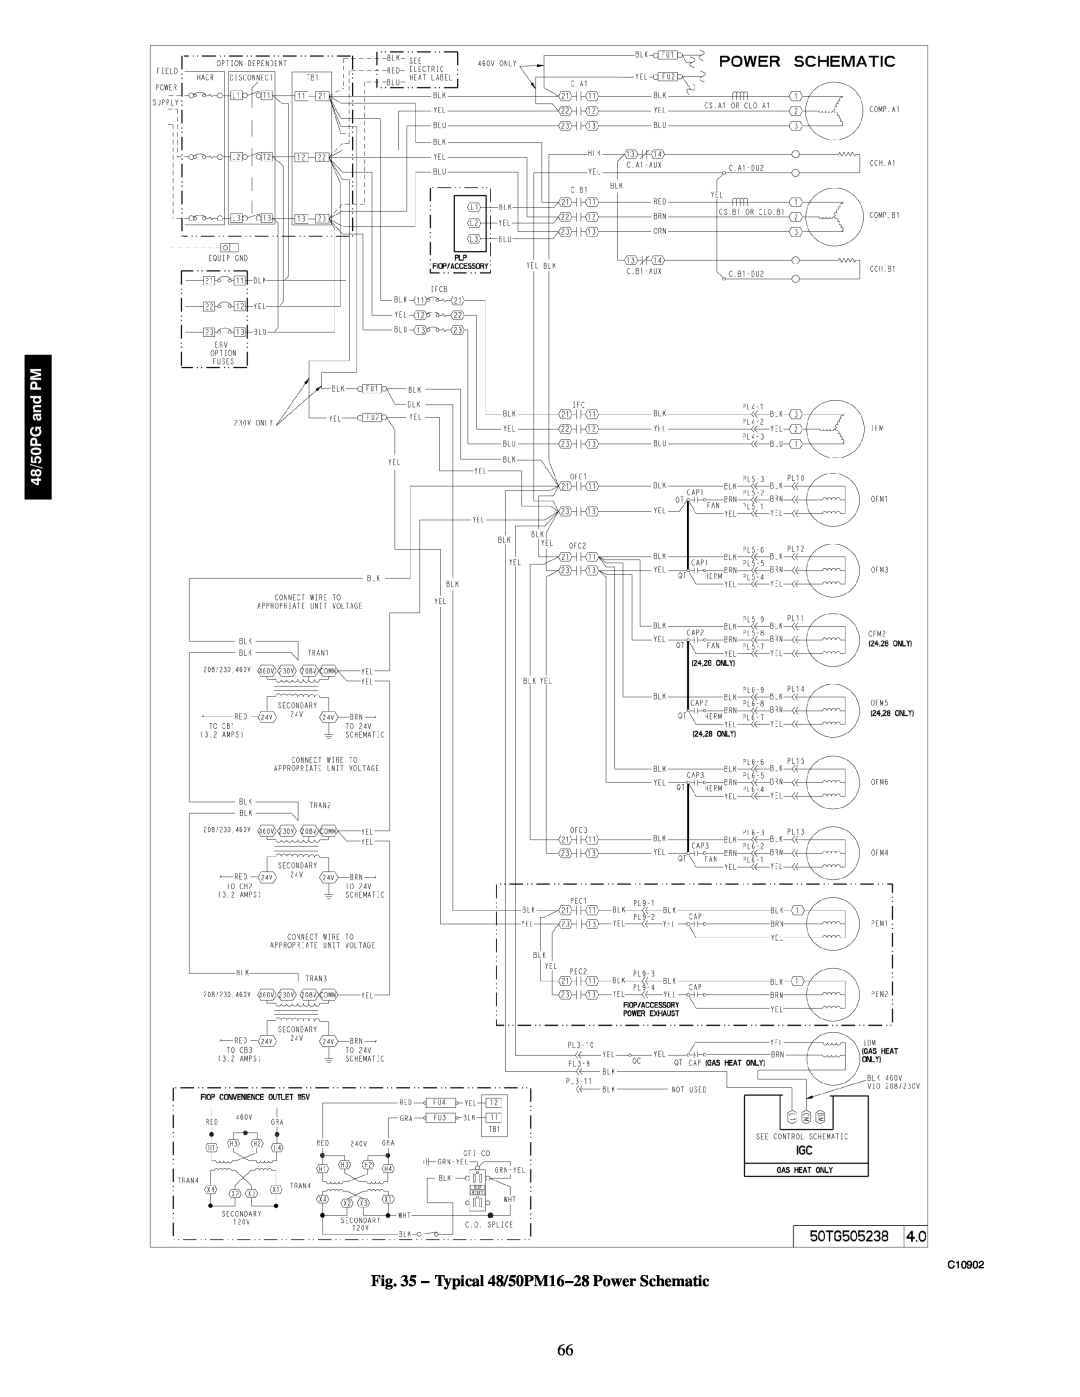 Carrier 48/50PG C03-14, 48/50PM C16-28 manual Typical 48/50PM16−28 Power Schematic, 48/50PG and PM, C10902 